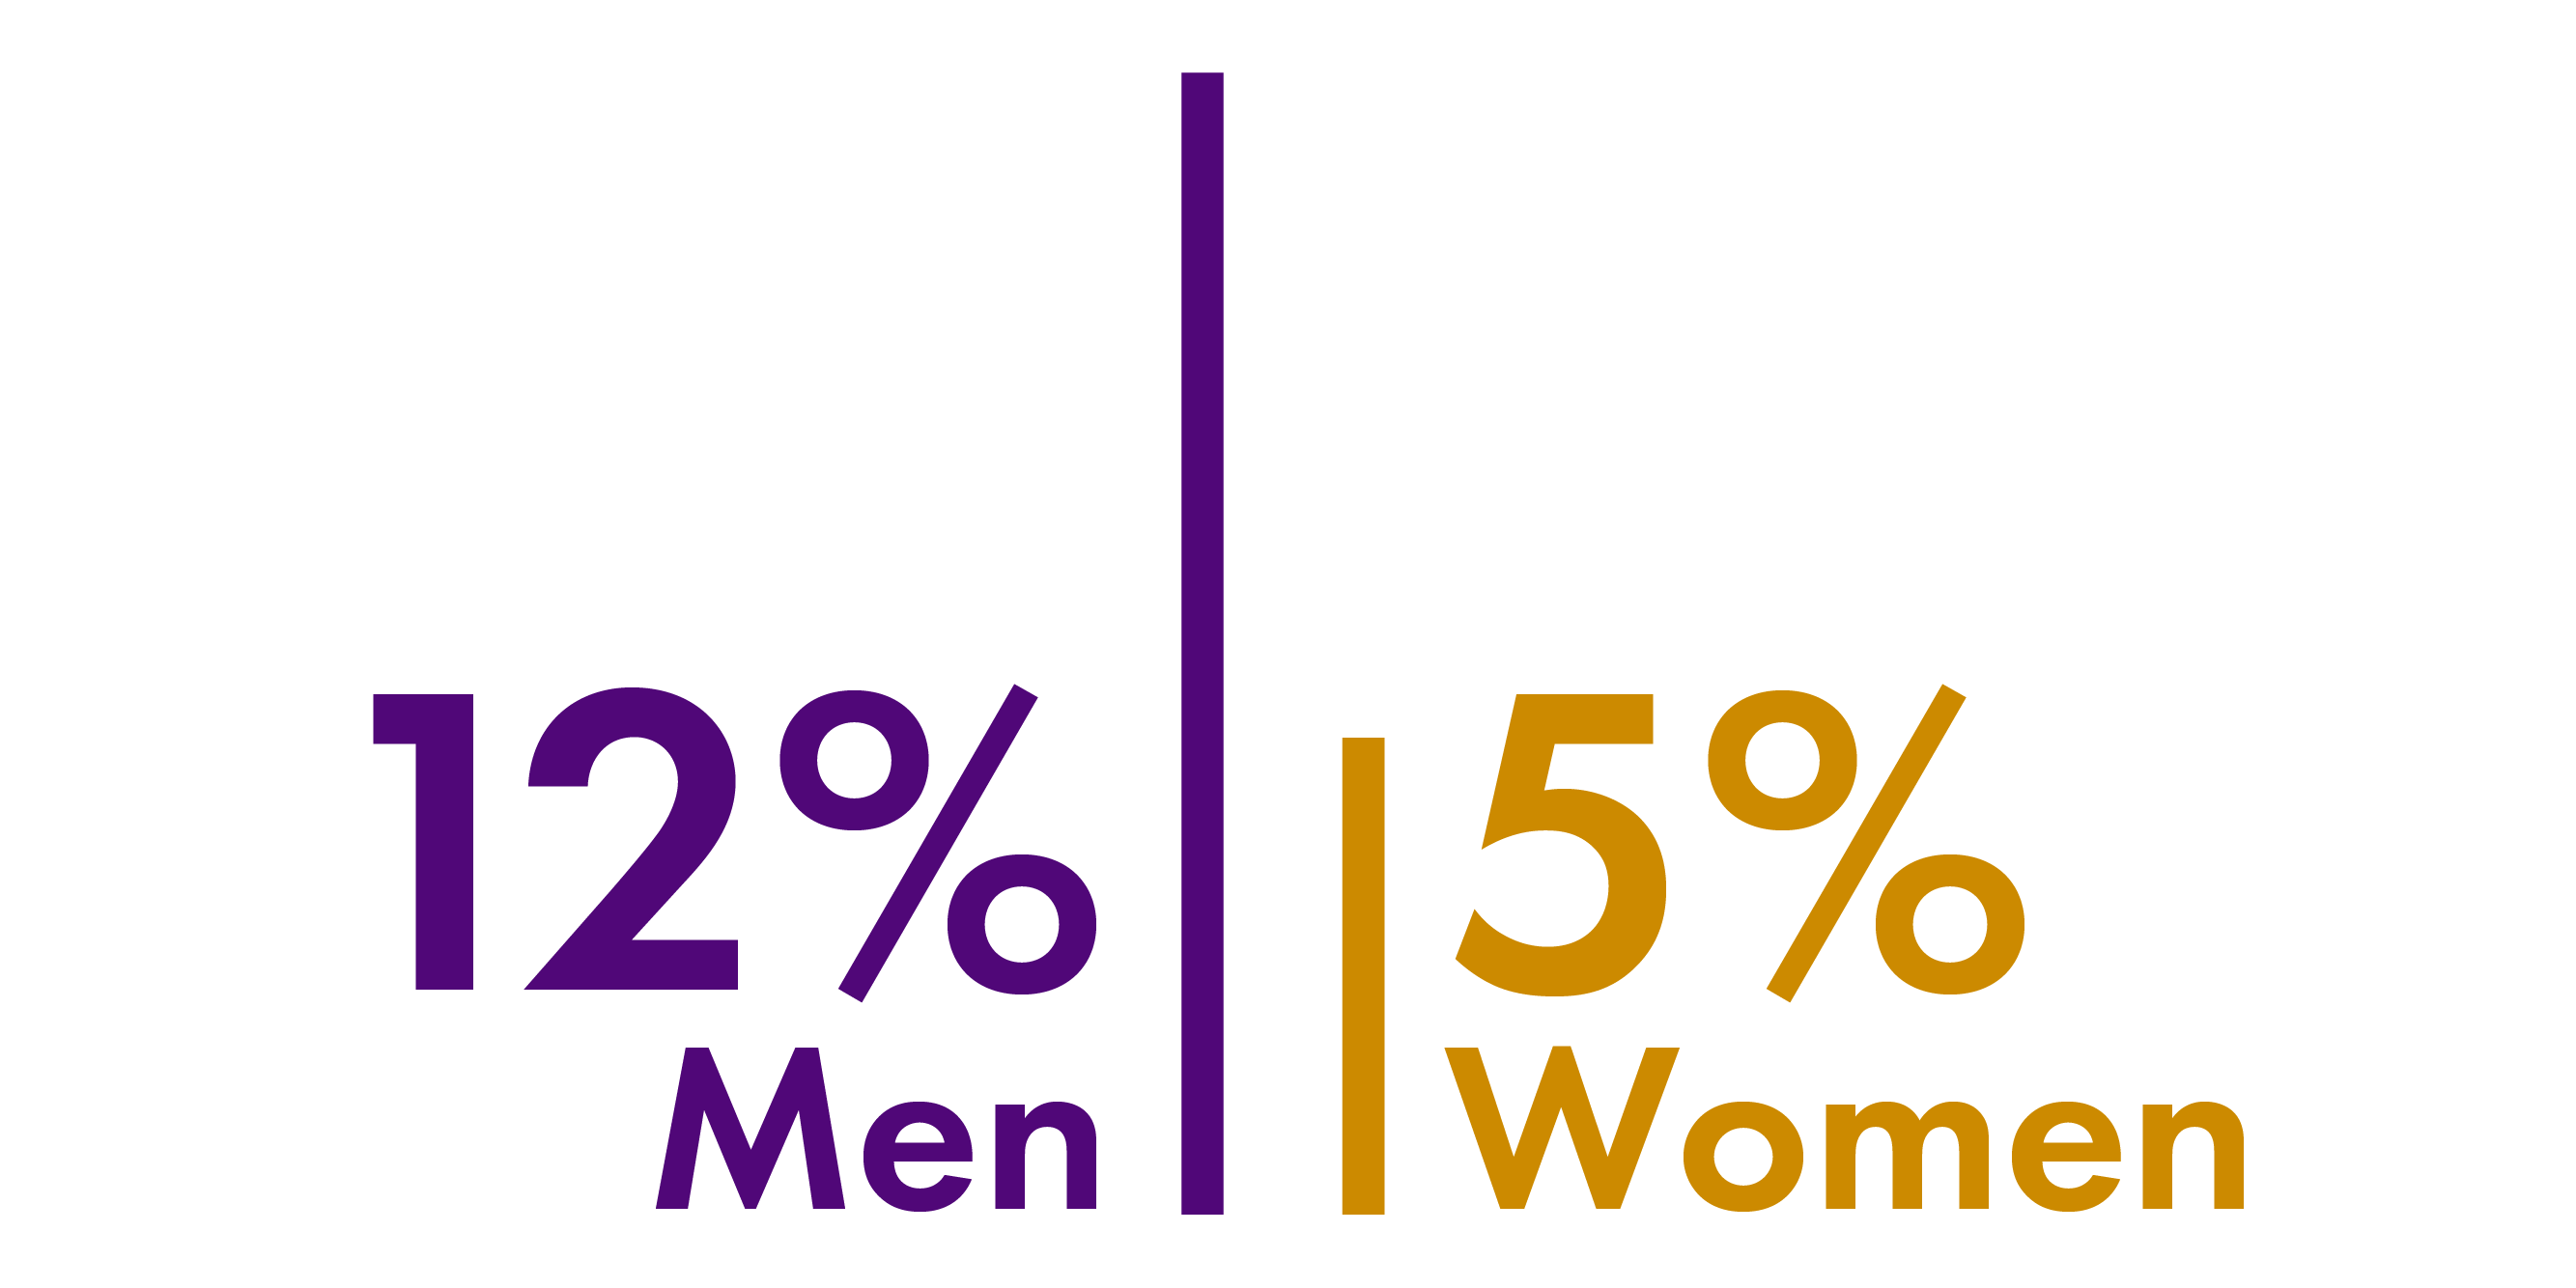 Bar chart showing that 12% of men and 5% of women took part in four or more gambling activities in the past year.